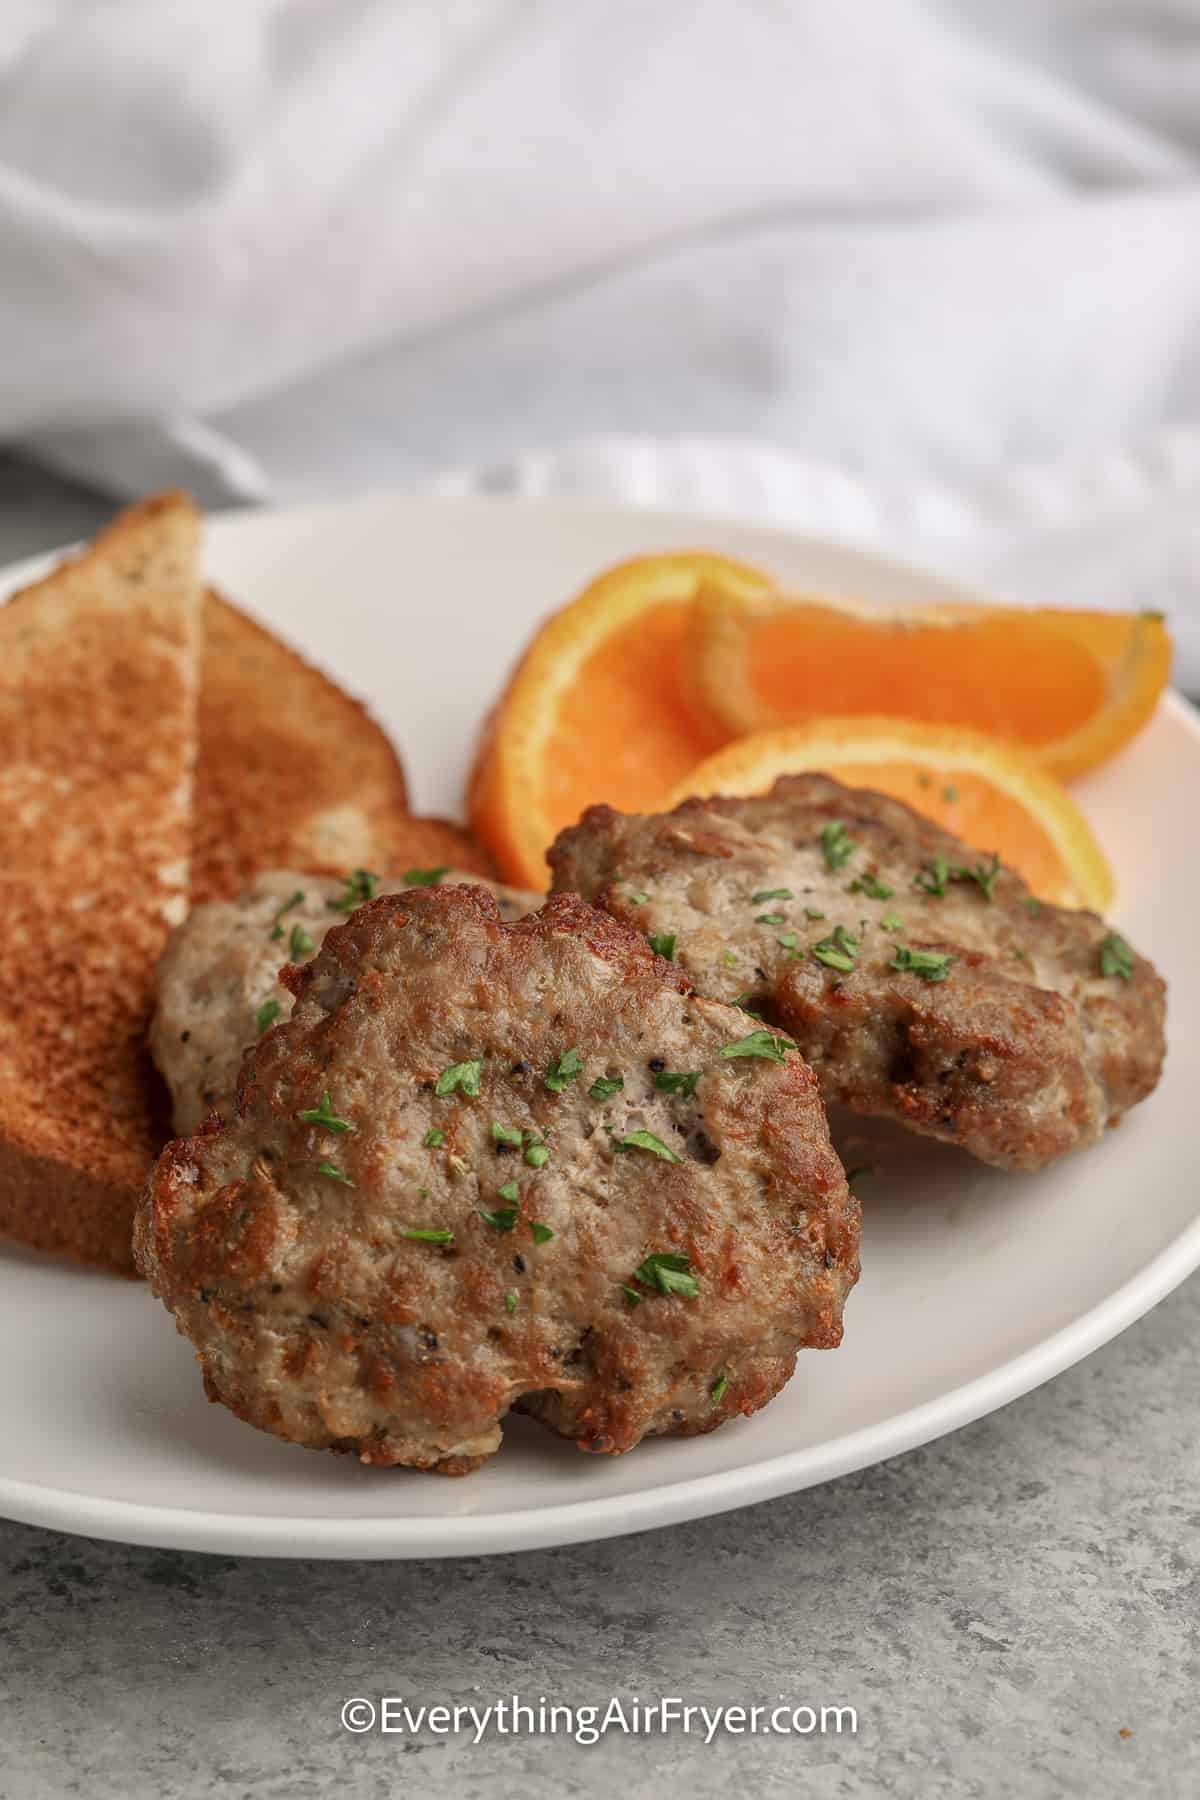 sausage patties on a plate with toast and orange slices